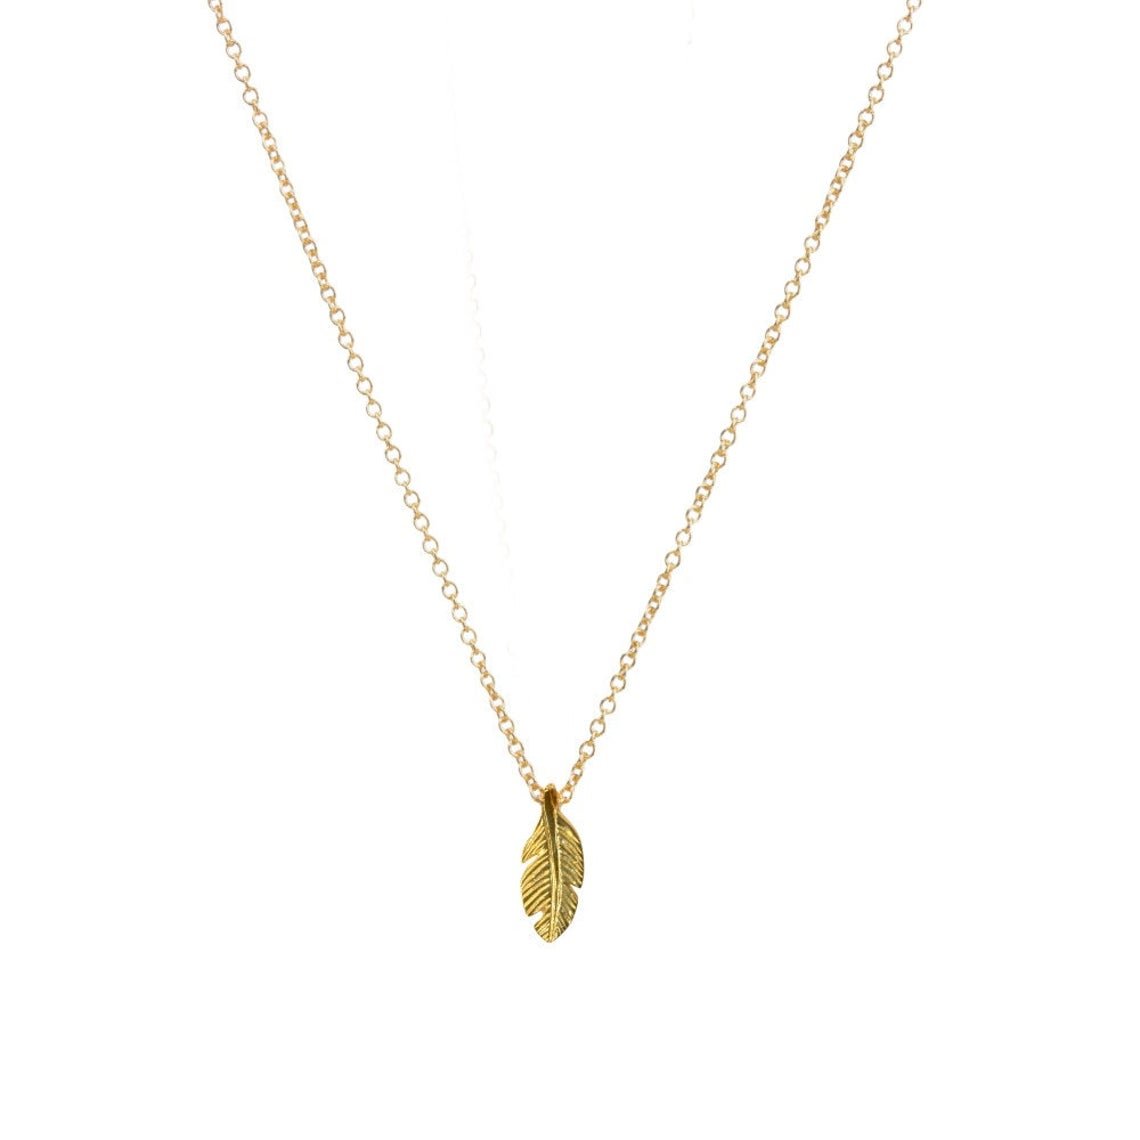 Gold Angel Feather Leaf Charm Freedom Bird Pendant Necklace